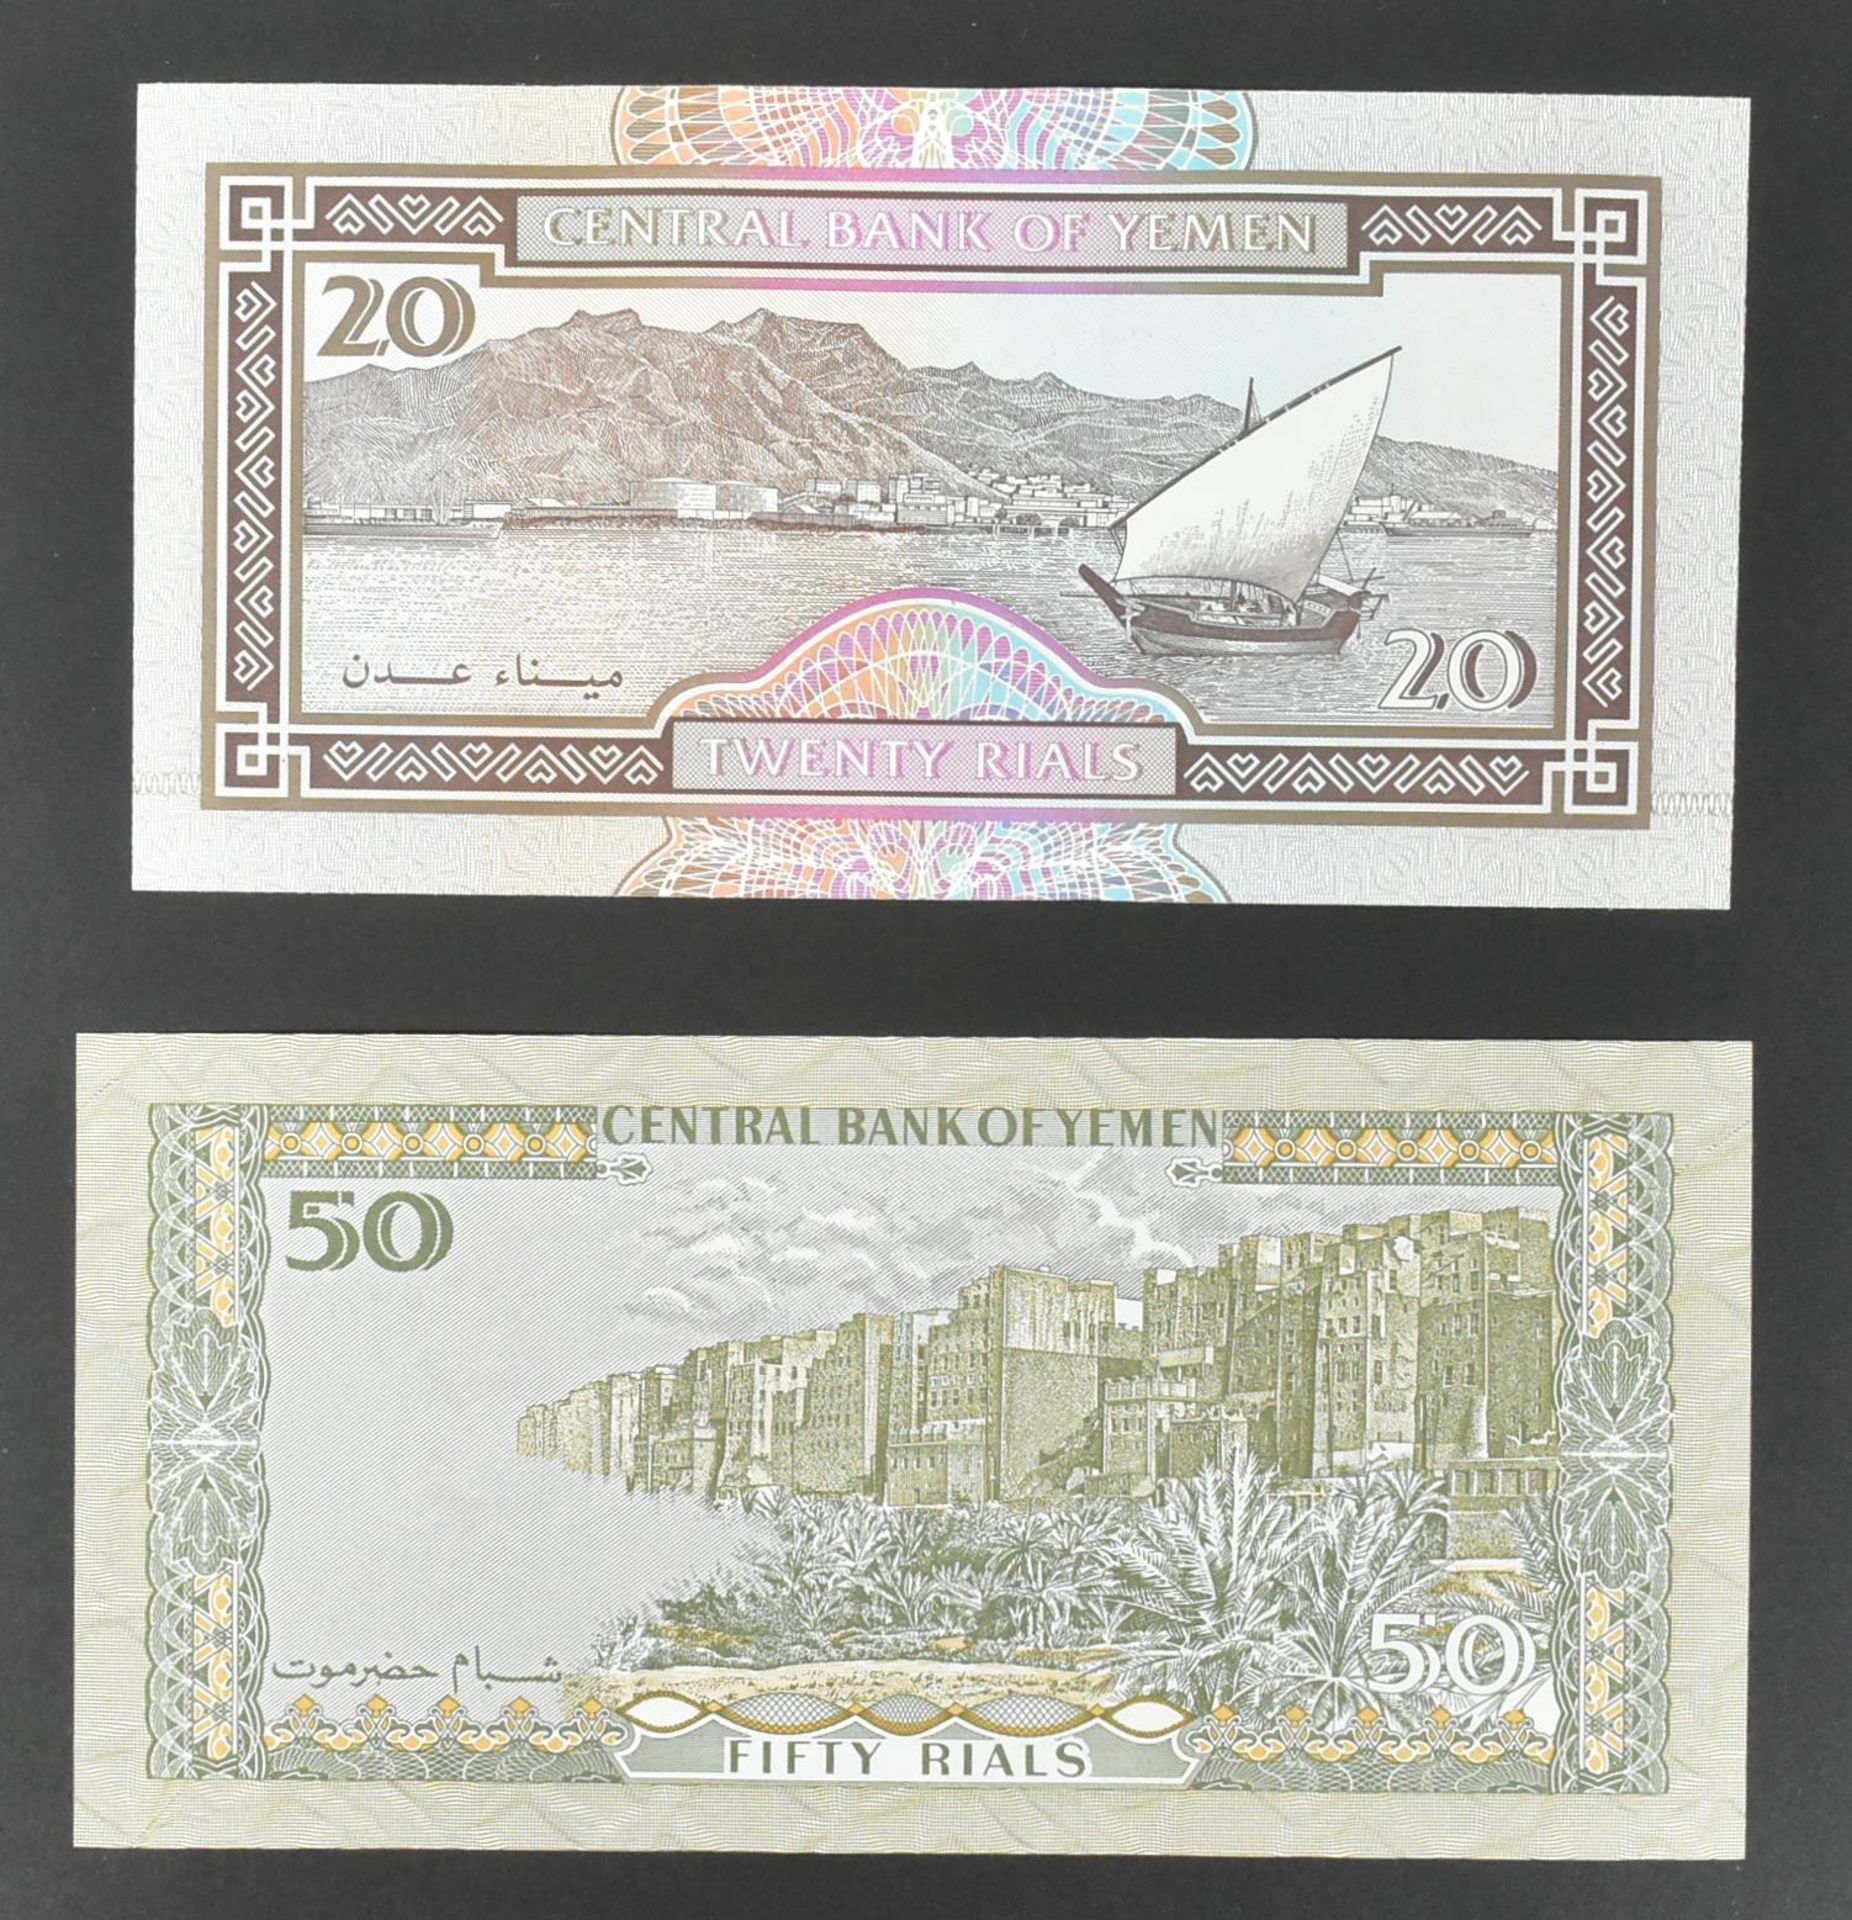 COLLECTION OF INTERNATIONAL UNCIRCULATED BANK NOTES - Image 28 of 36